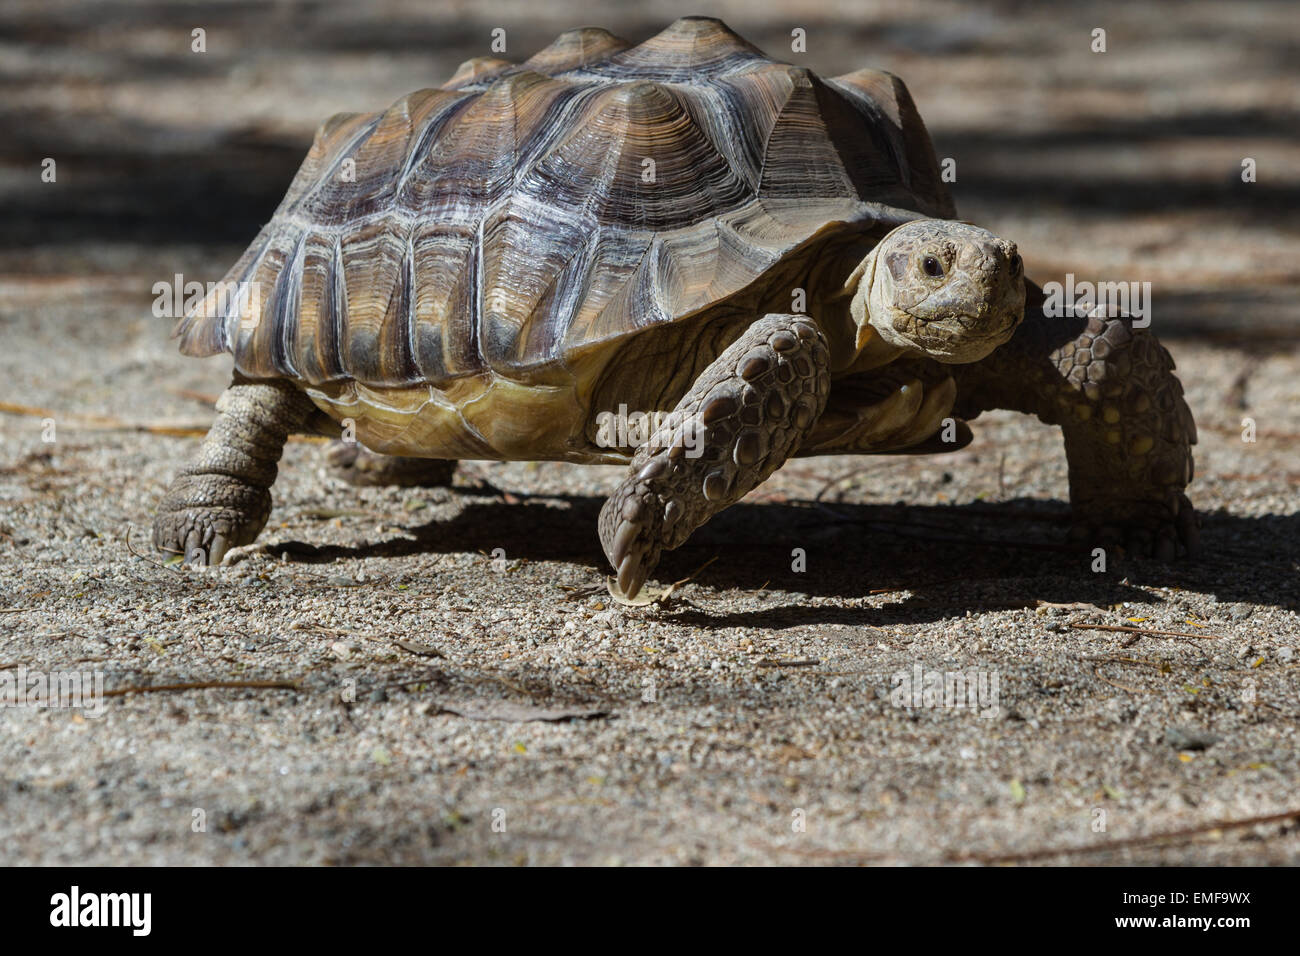 African spurred tortoise sprinting on the desert floor in southern California. Stock Photo